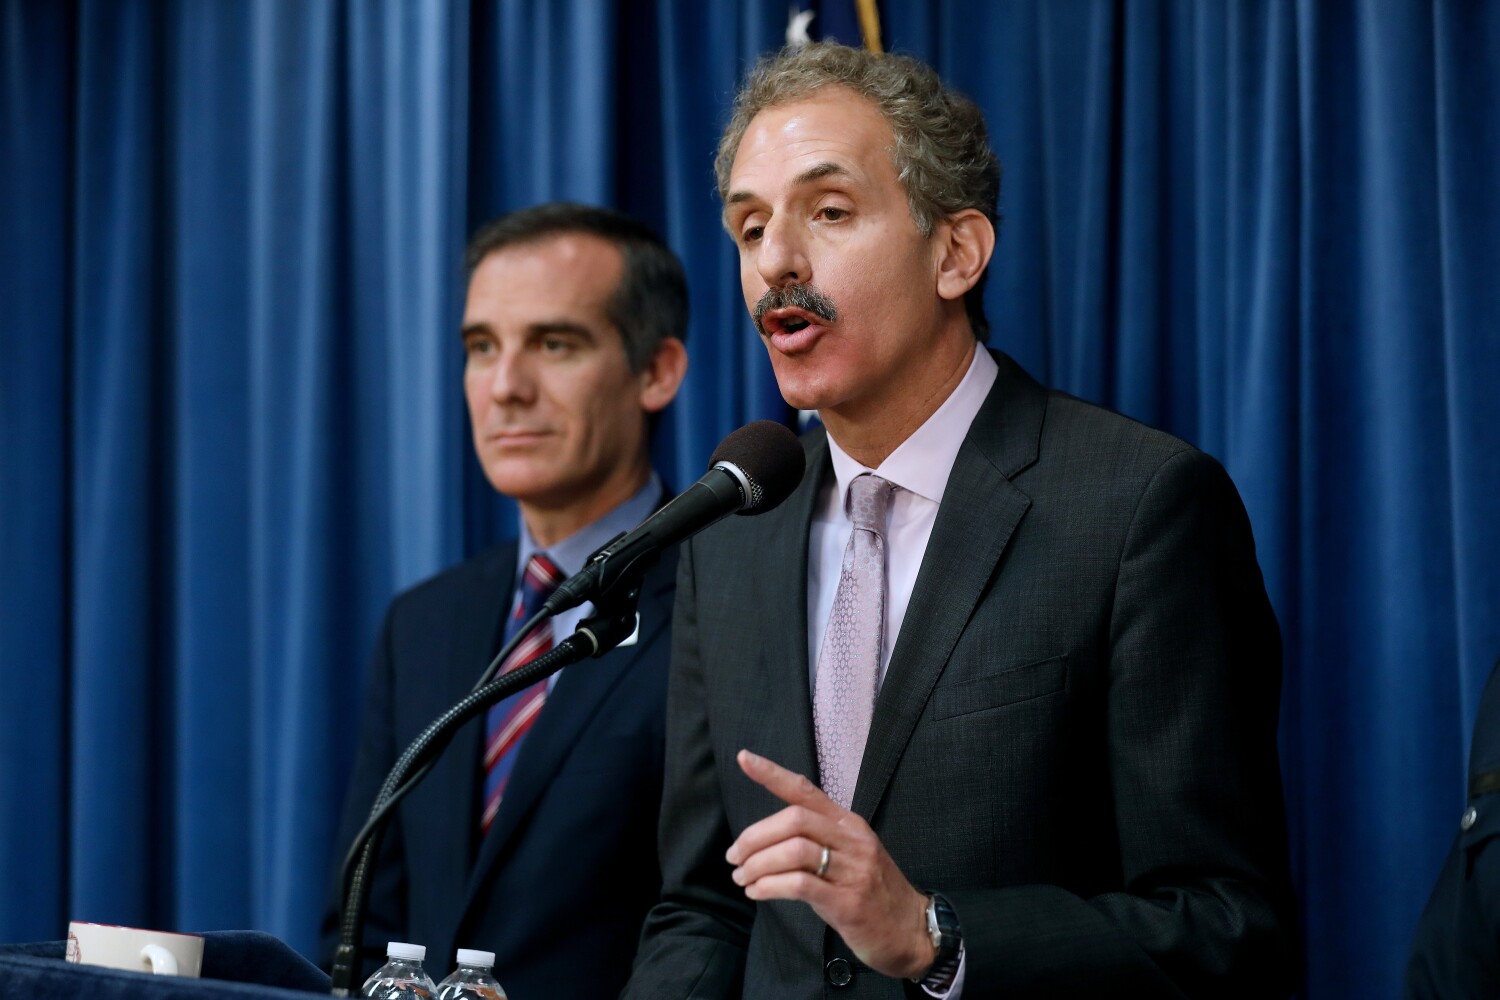 City Atty. Mike Feuer wants to double the size of the City Council — and slash its pay